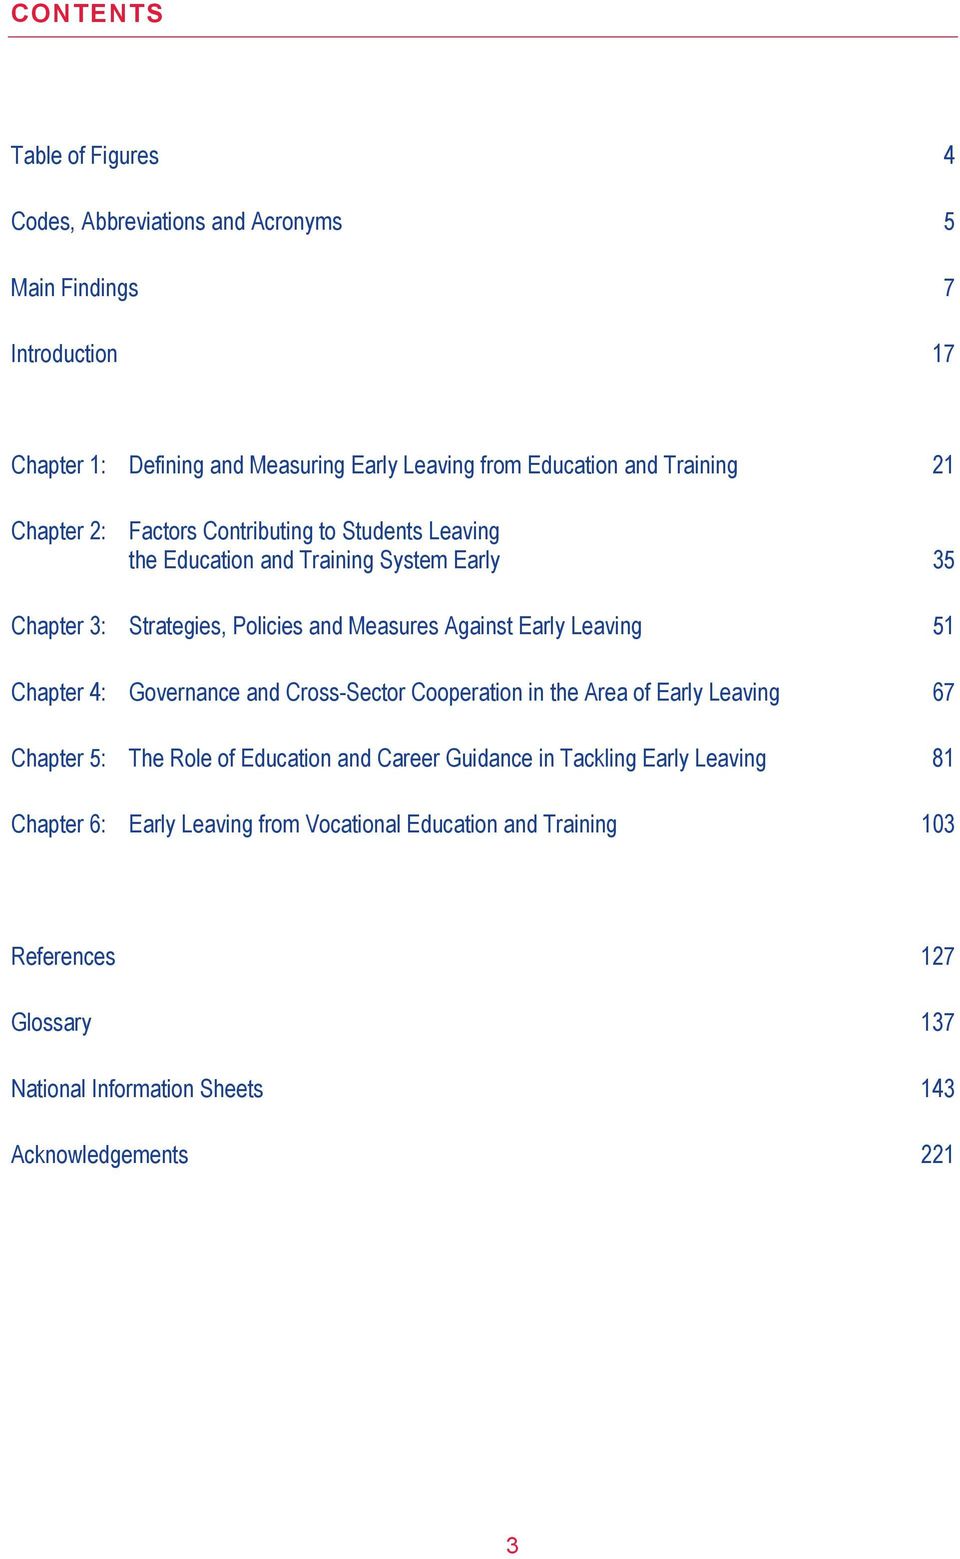 Early Leaving 51 Chapter 4: Governance and Cross-Sector Cooperation in the Area of Early Leaving 67 Chapter 5: The Role of Education and Career Guidance in